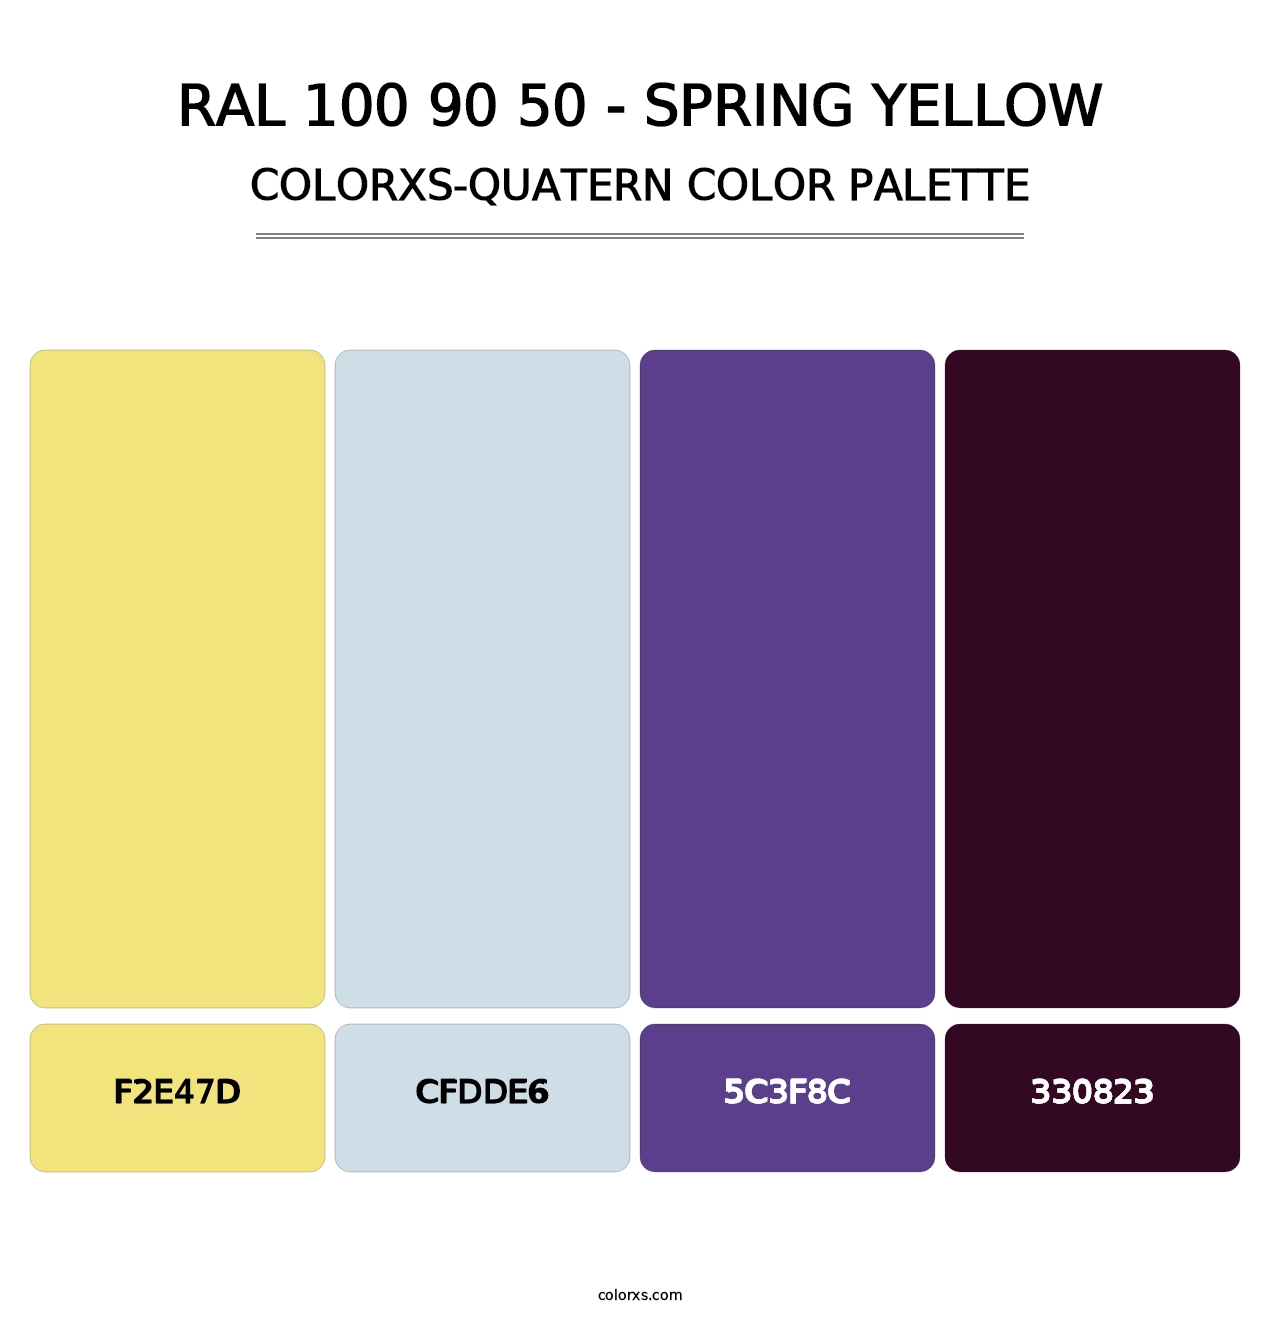 RAL 100 90 50 - Spring Yellow - Colorxs Quatern Palette